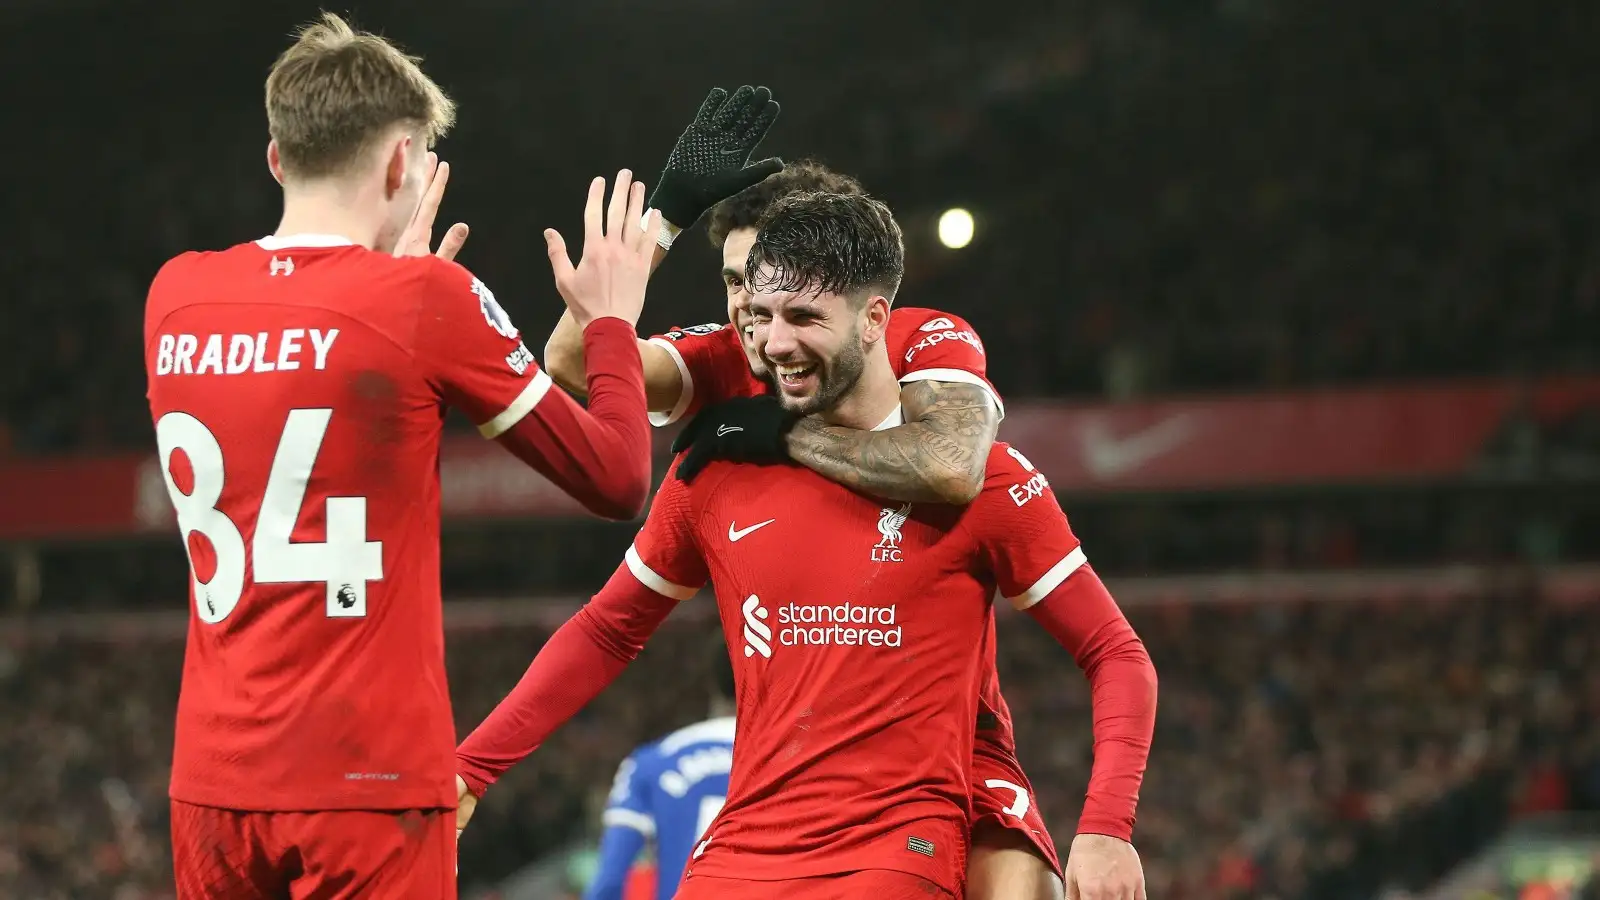 Liverpool rumbled over Chelsea